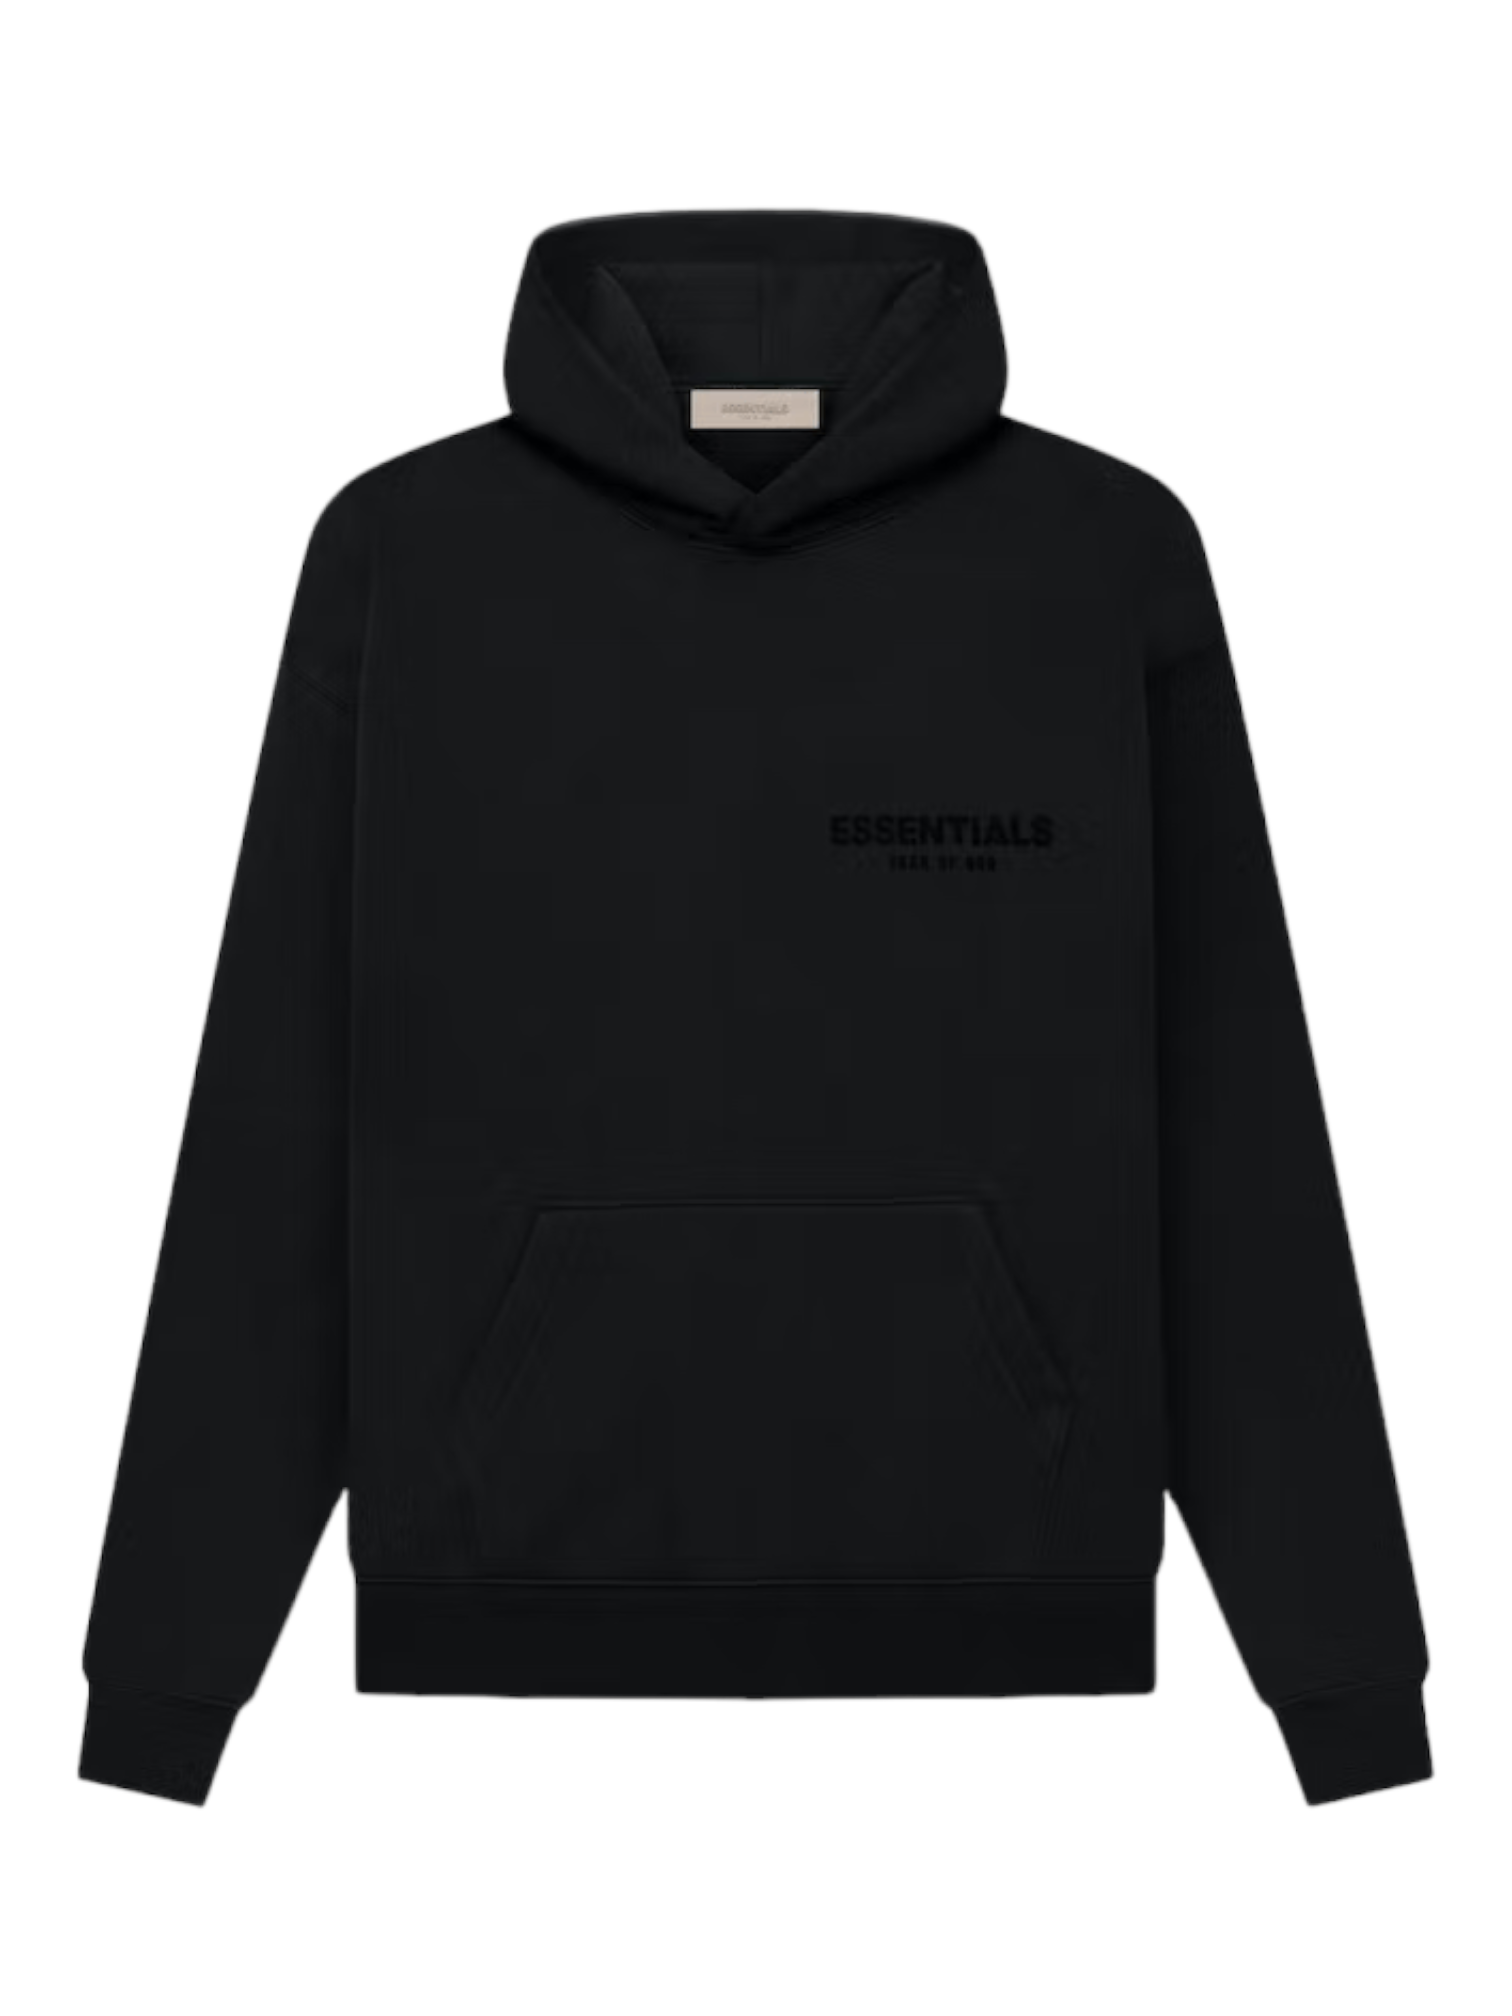 Essentials Fear of God Stretch Limo Black Fleece Hoodie SS22 - Genuine Design Luxury Consignment Calgary, Canada New & Pre-Owned Authentic Clothing, Shoes, Accessories.